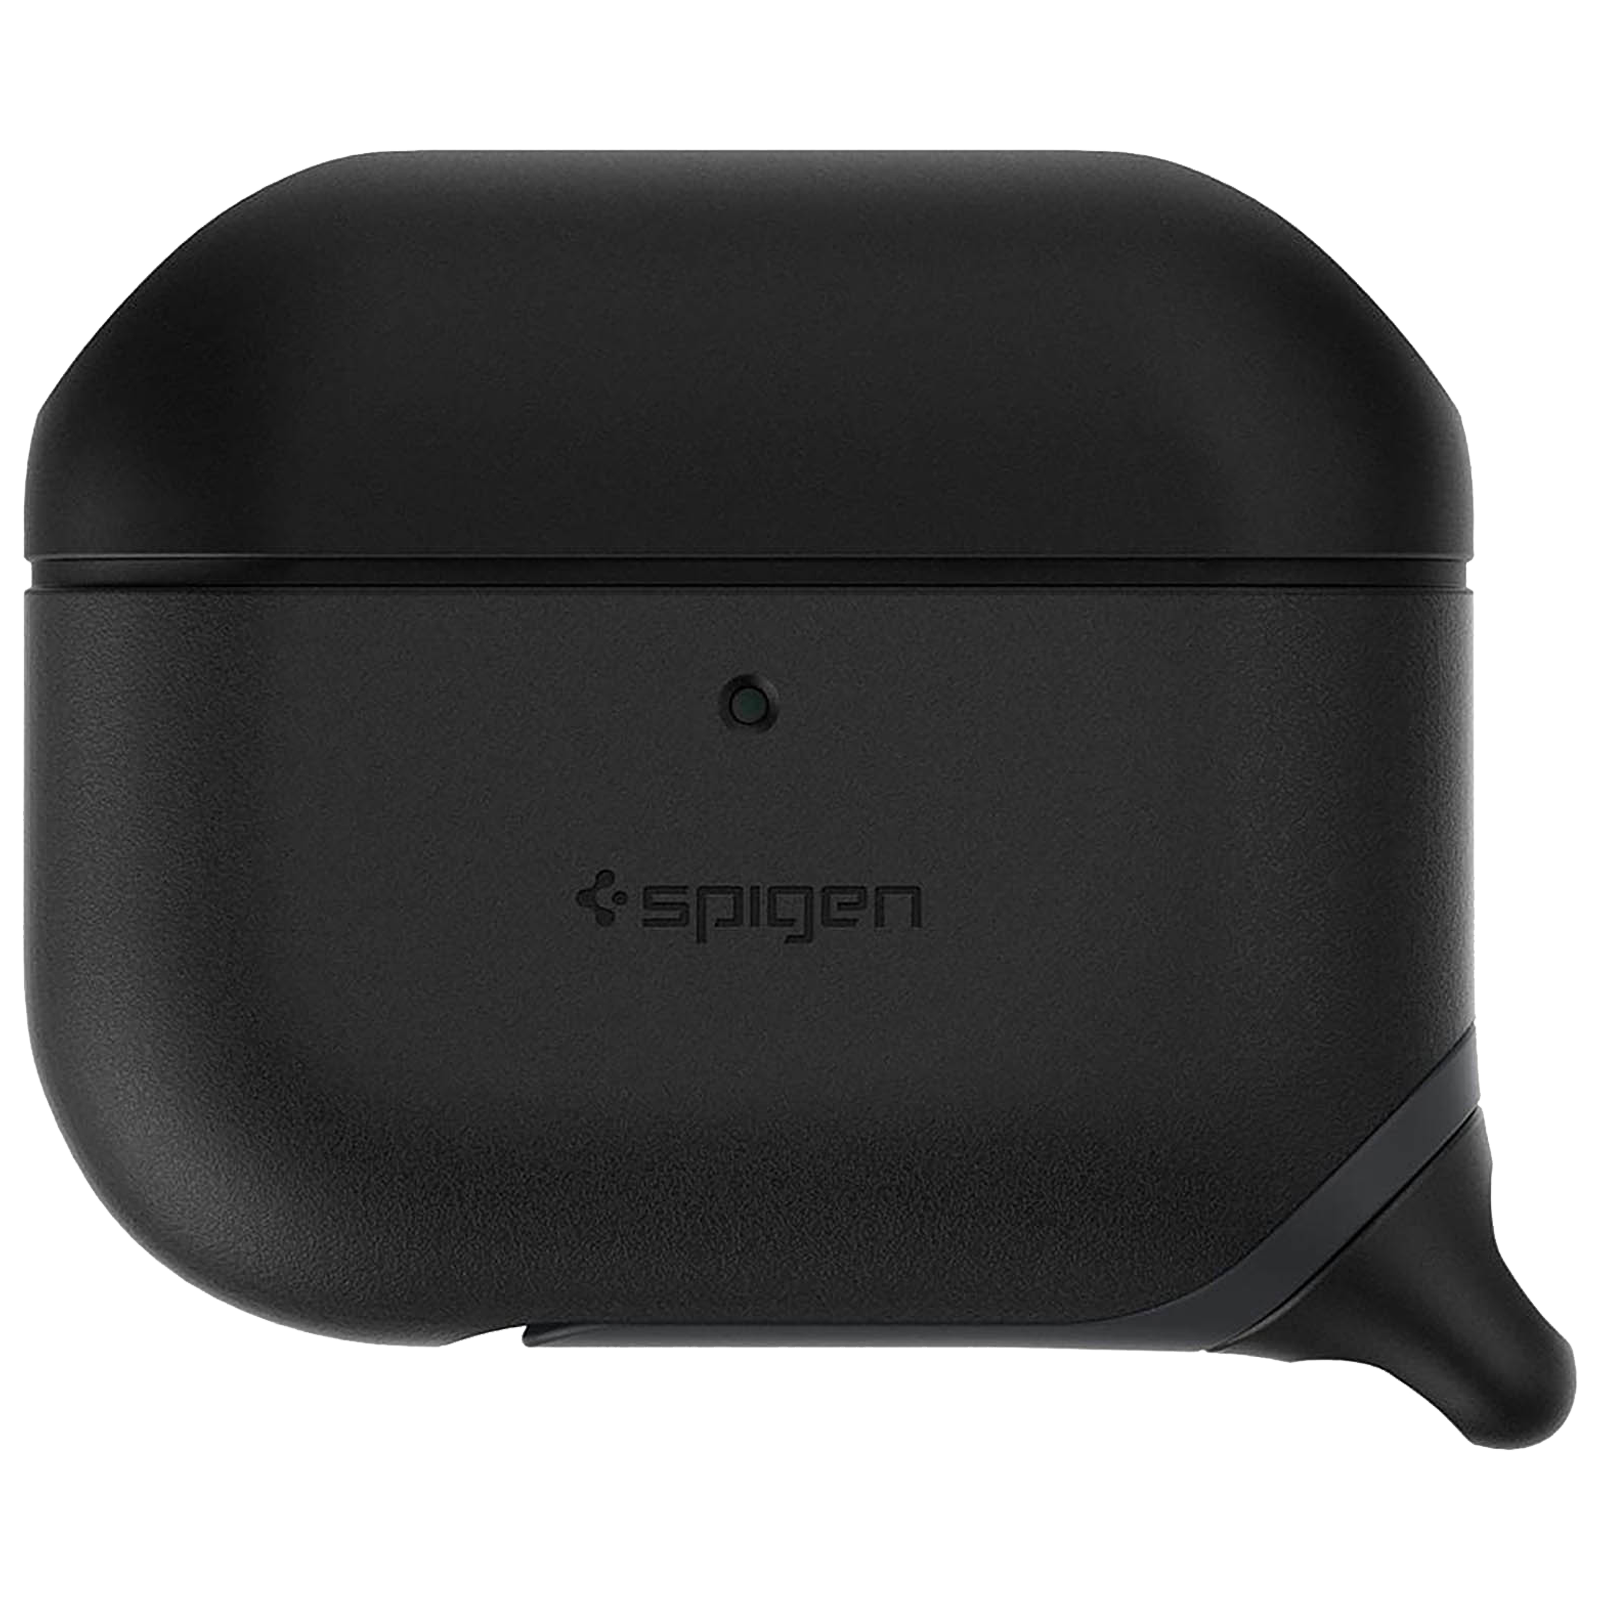 Spigen Slim Armor IP Silicone Full Cover Case For AirPods Pro (Fully Compatible With Wireless Charging, ASD00542, Black)_1